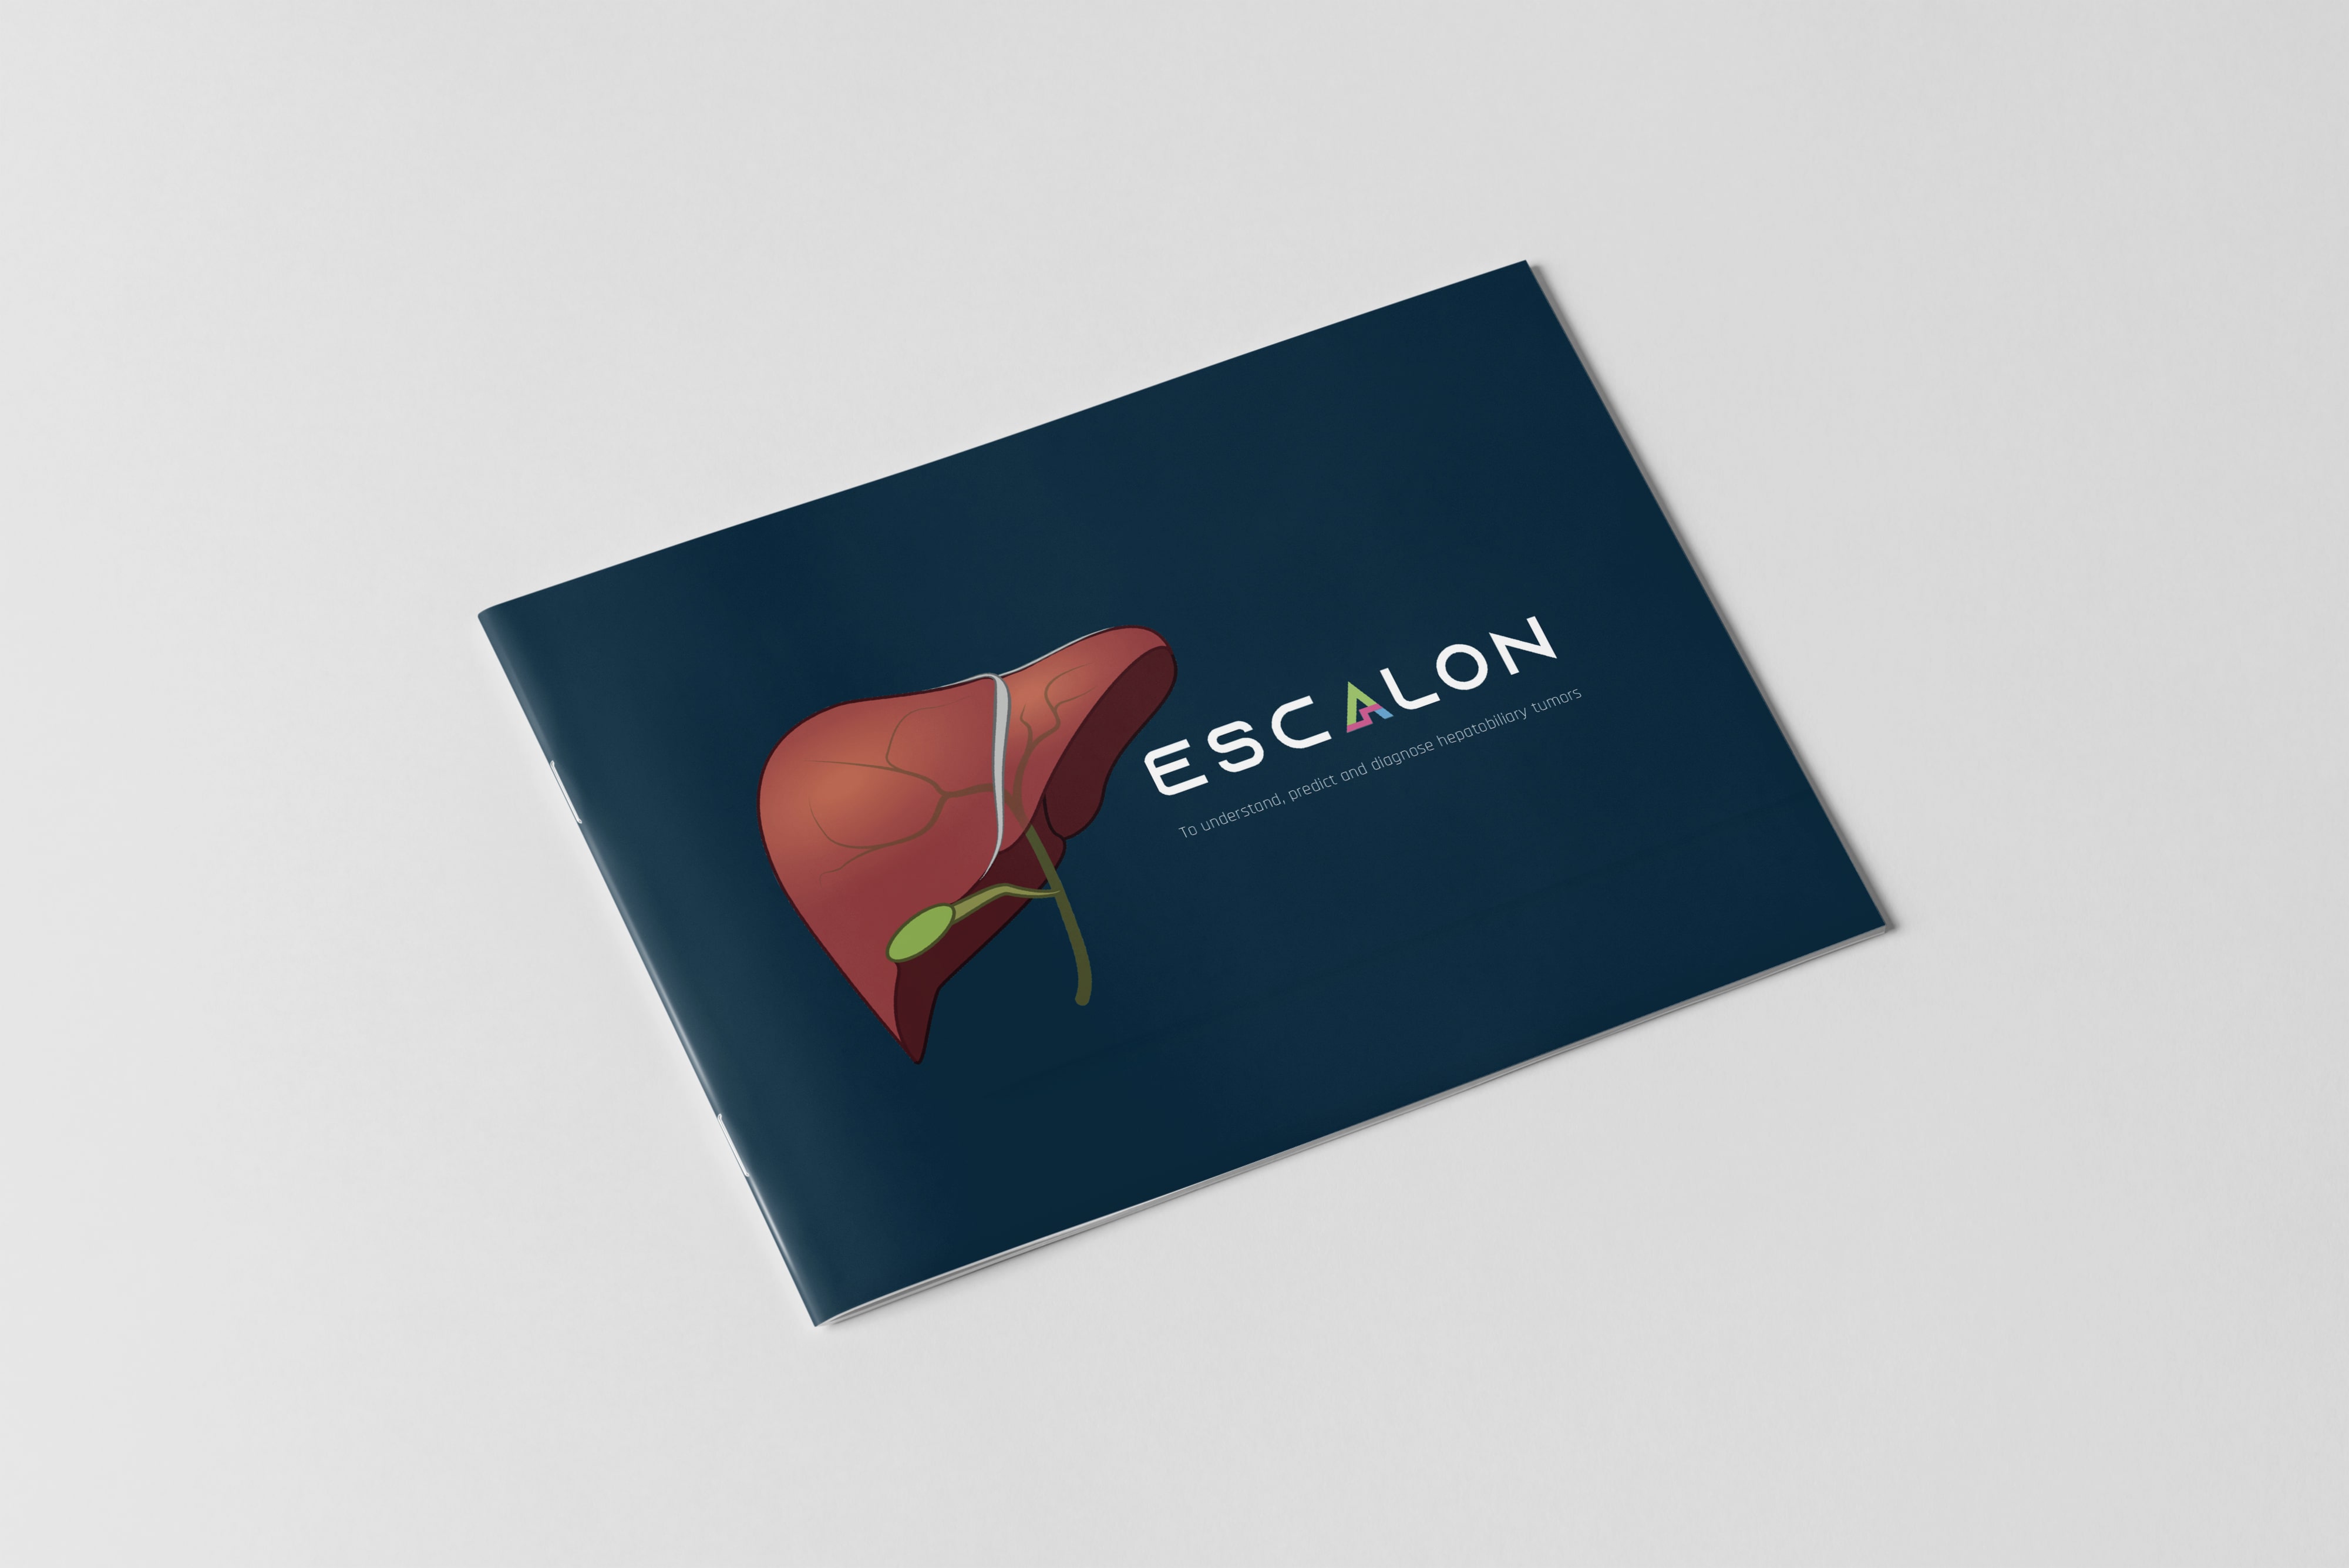 This image shows the front page of the brochure for the ESCALON project with a reconstruction of a liver